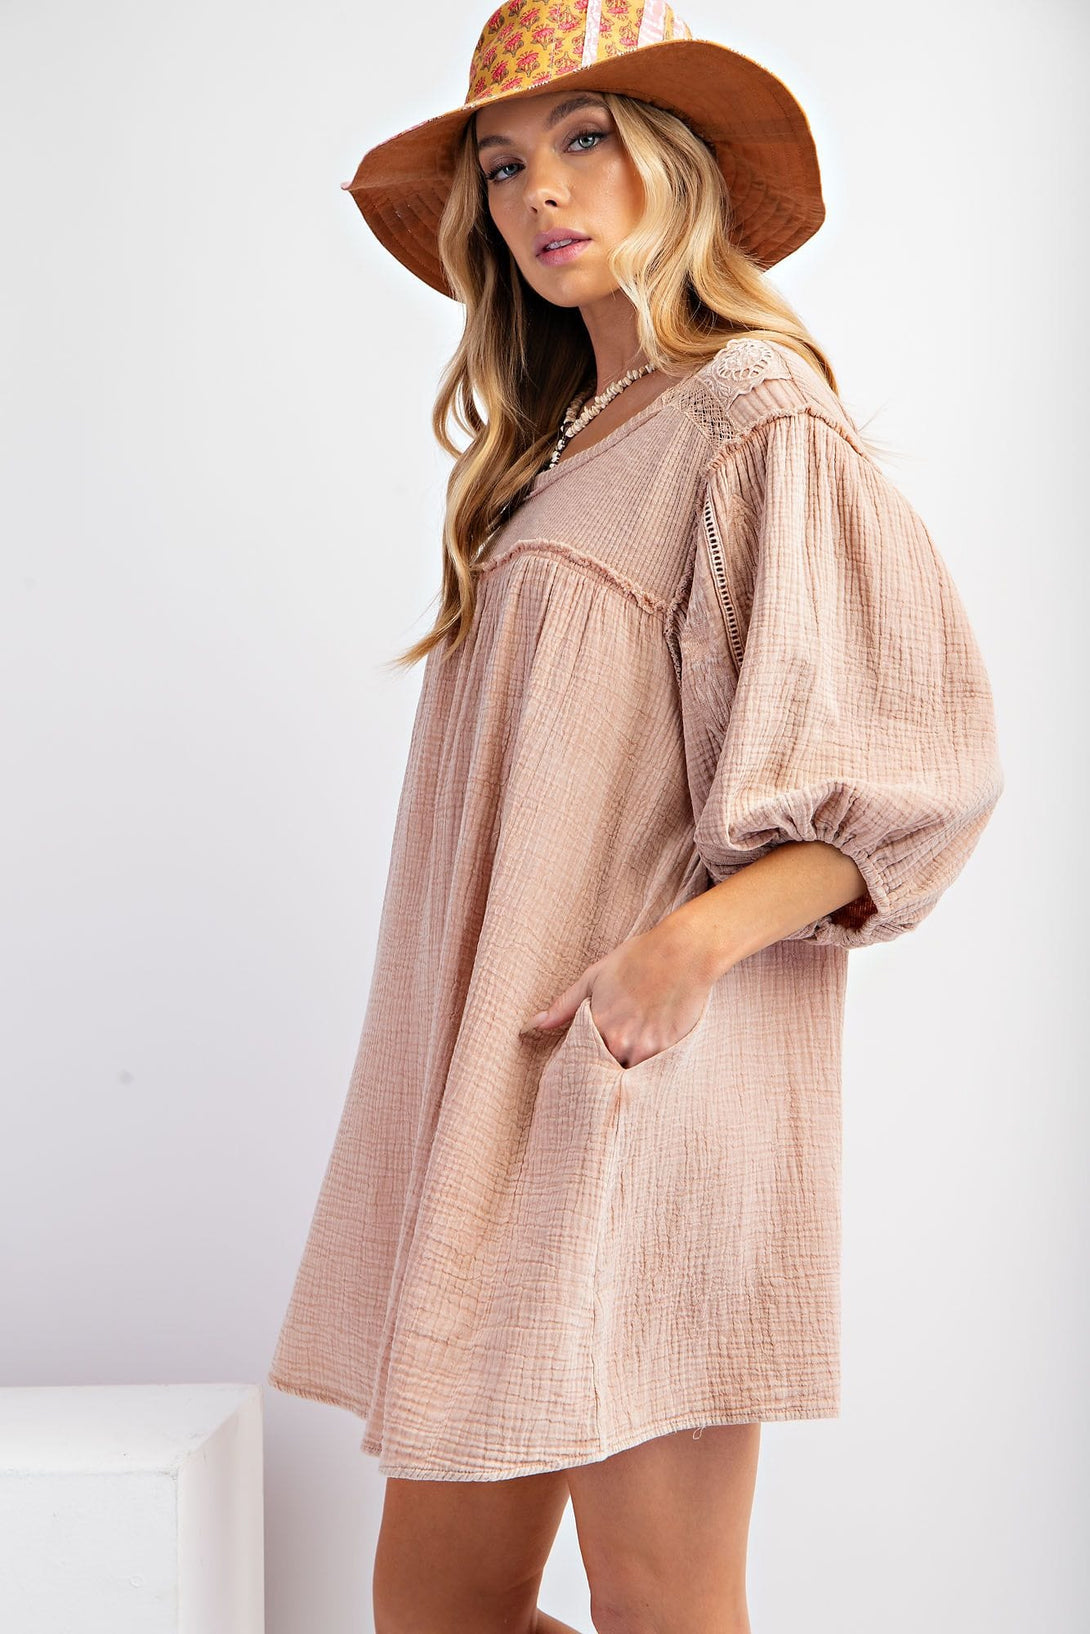 Easel Mineral Washed Cotton Gauze Tunic Dress